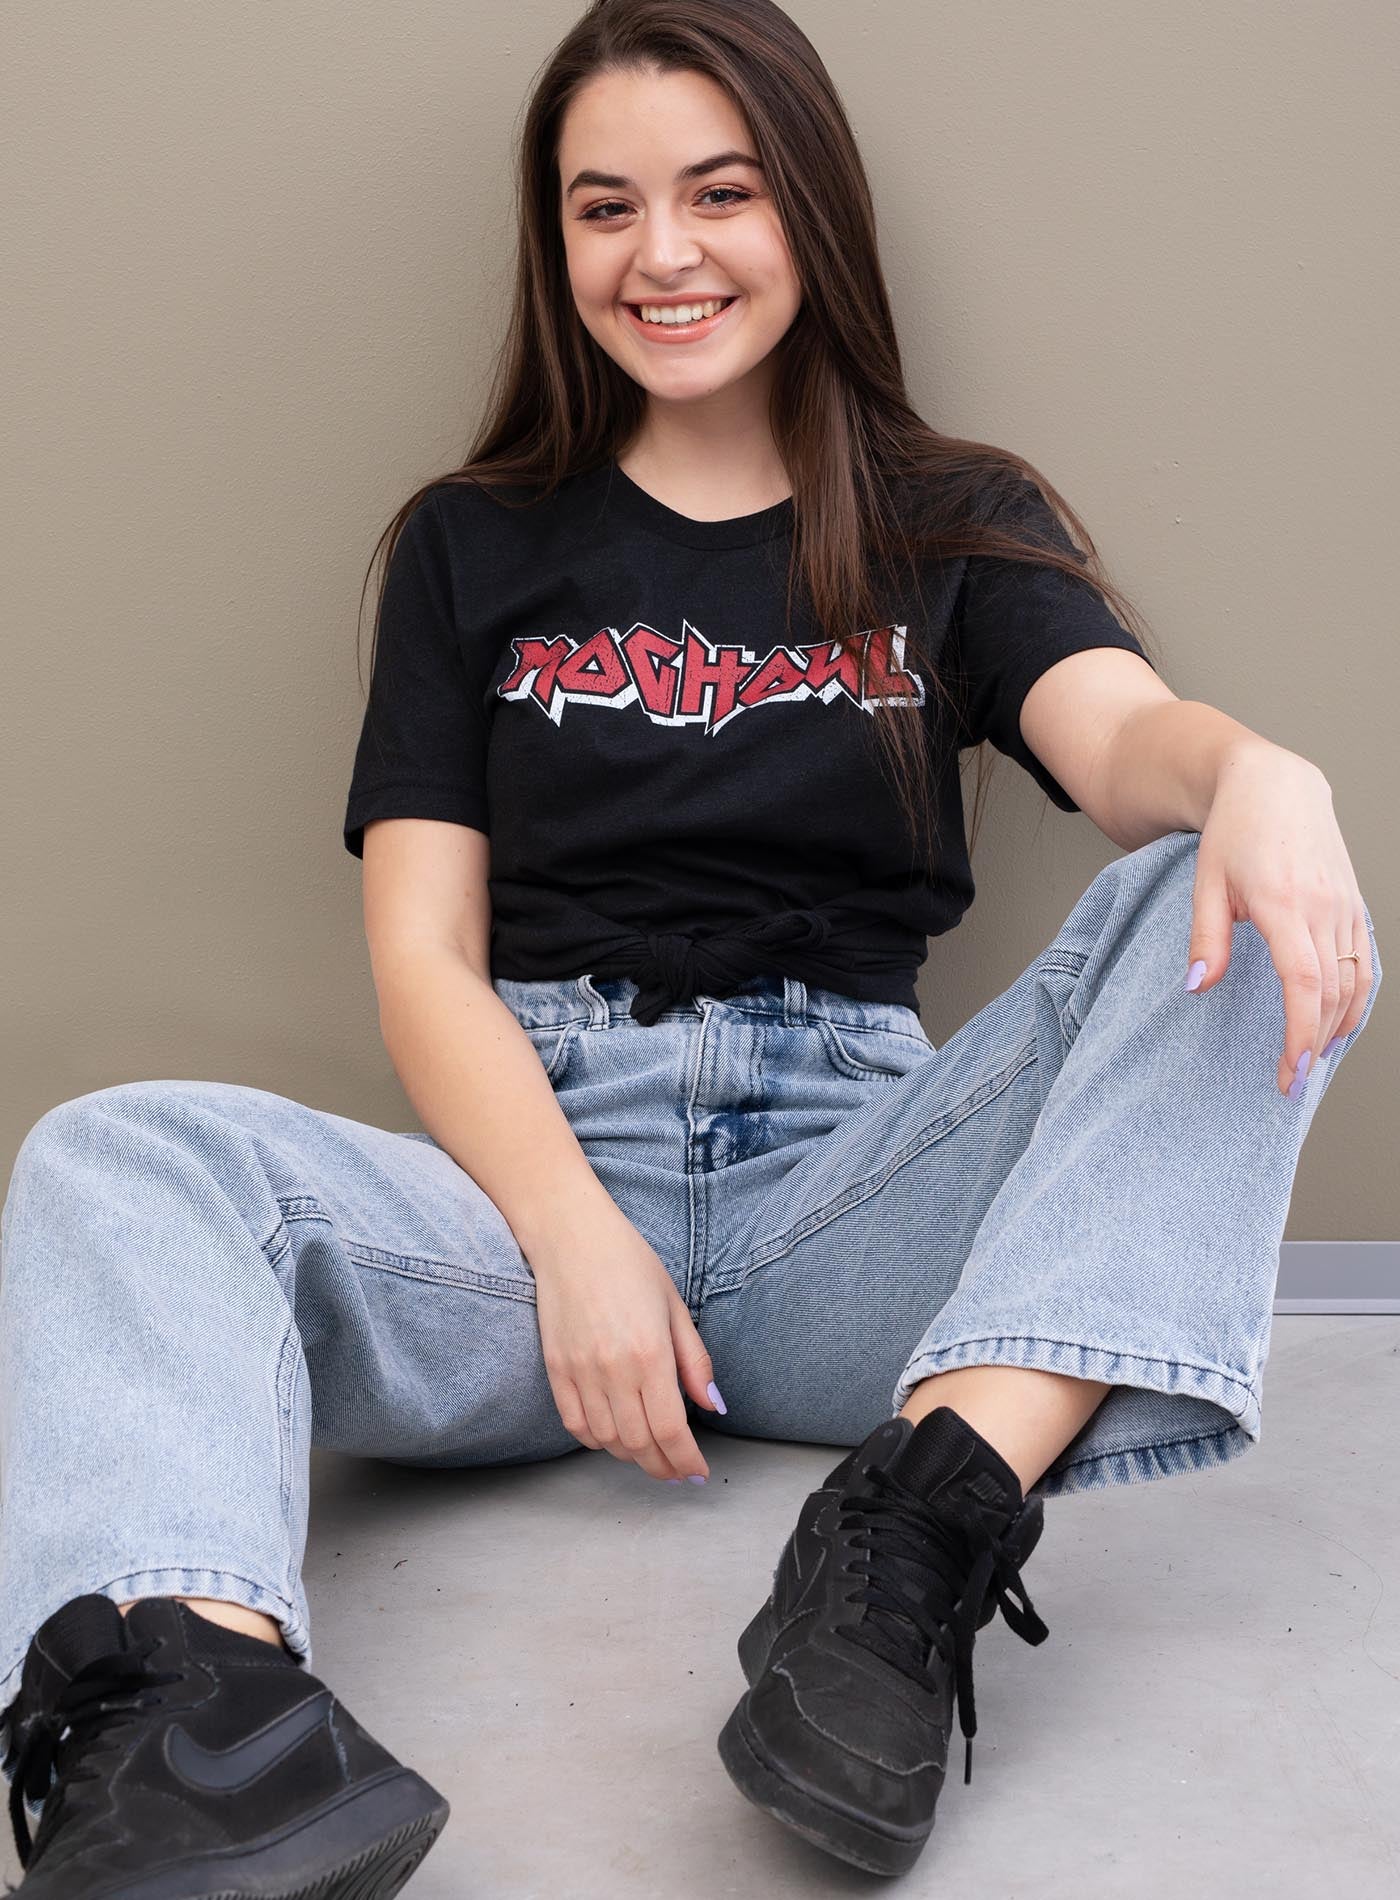 Girl modeling a Heather black unisex t-shirt featuring a front print of the Moghoul logo in vintage 80's hair-band style.